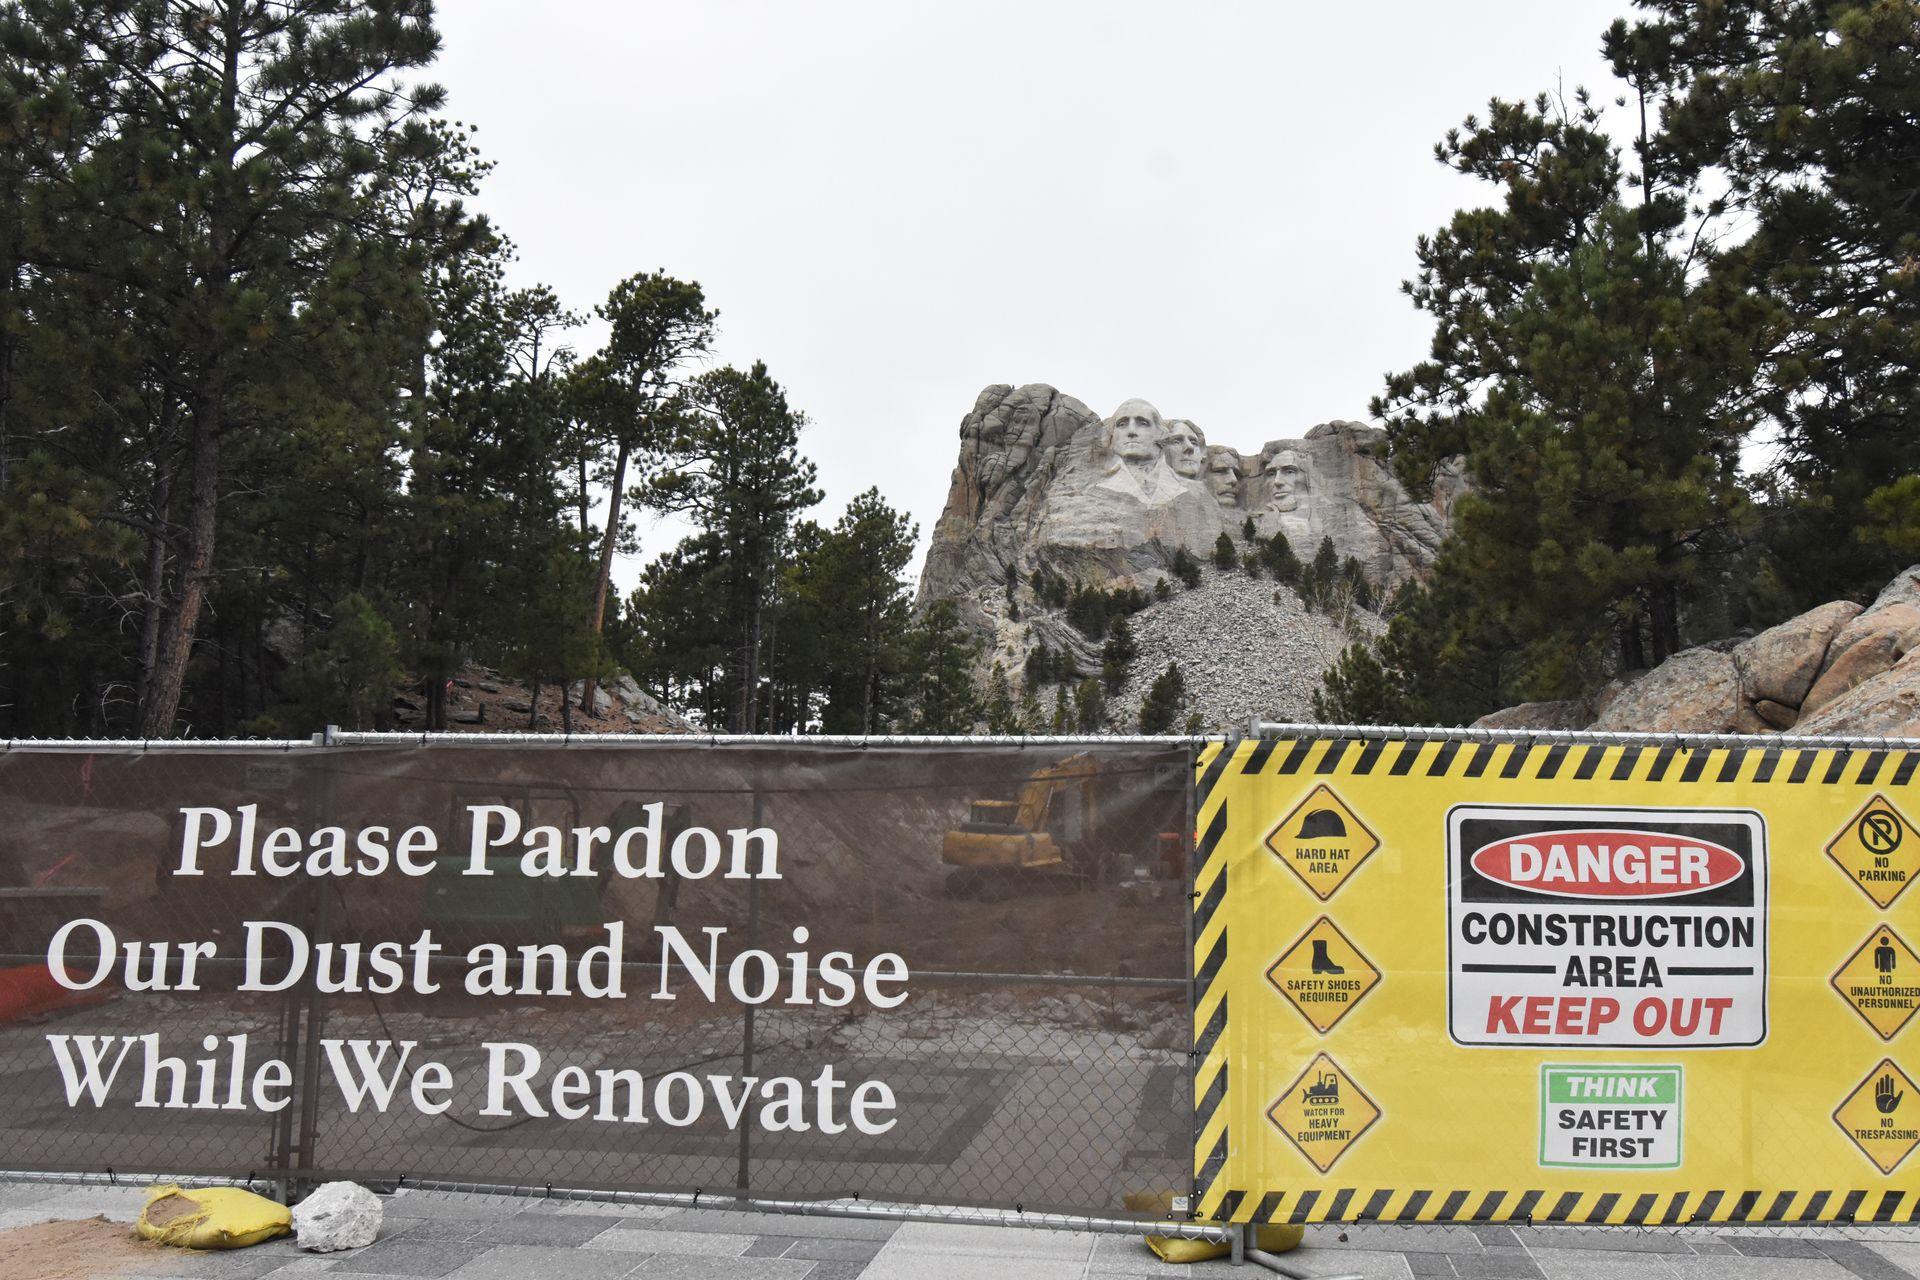 A construction fence with Mount Rushmore in the background.